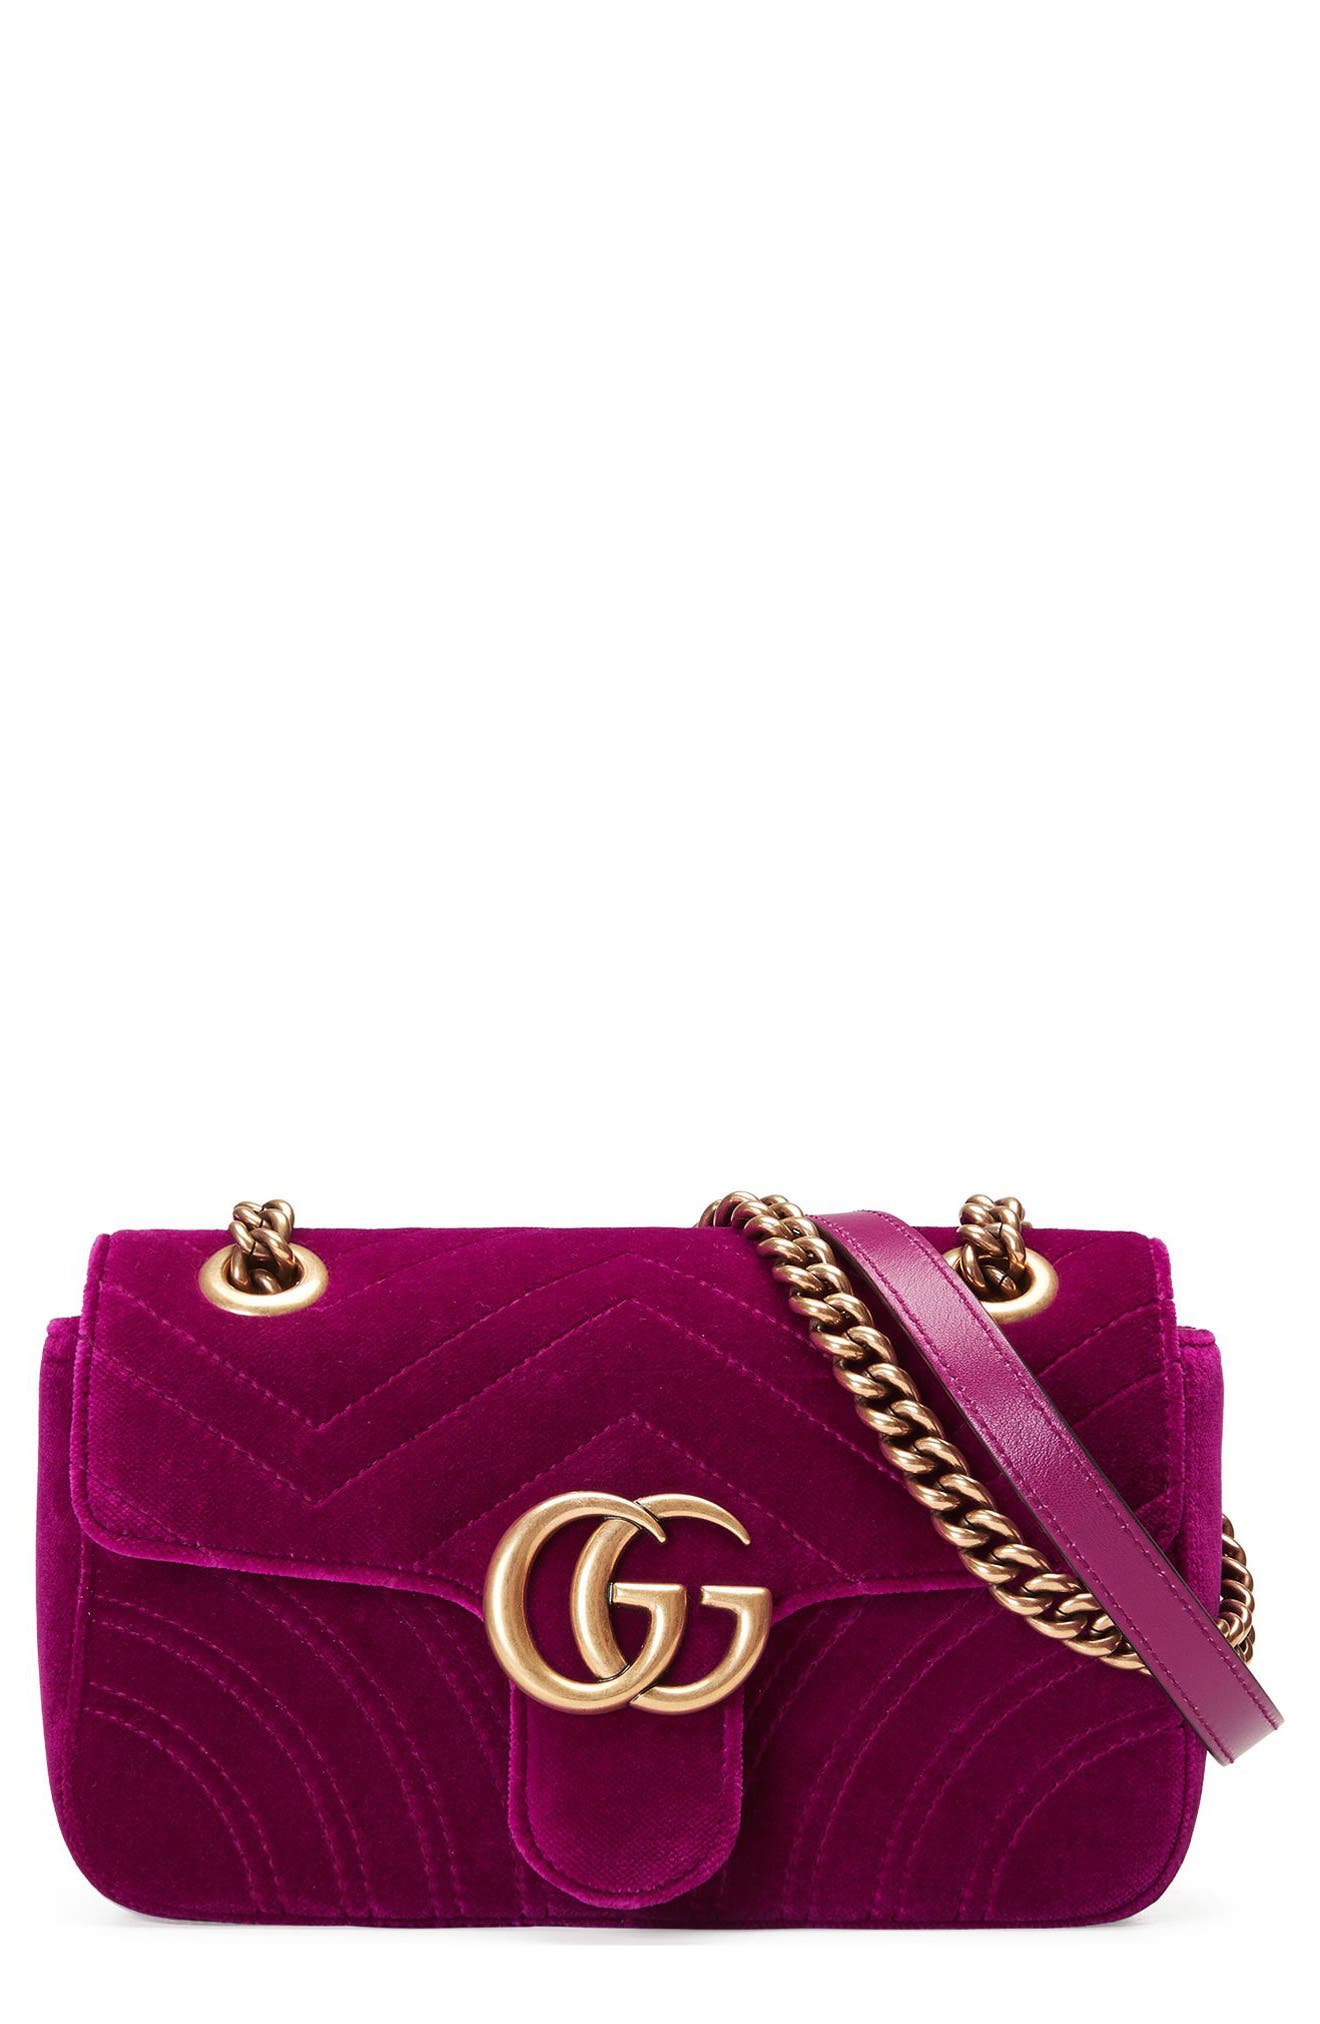 GUCCI GG MARMONT 2.0 SUEDE SHOULDER BAG, FUCHSIA , RED/BROWN | ModeSens